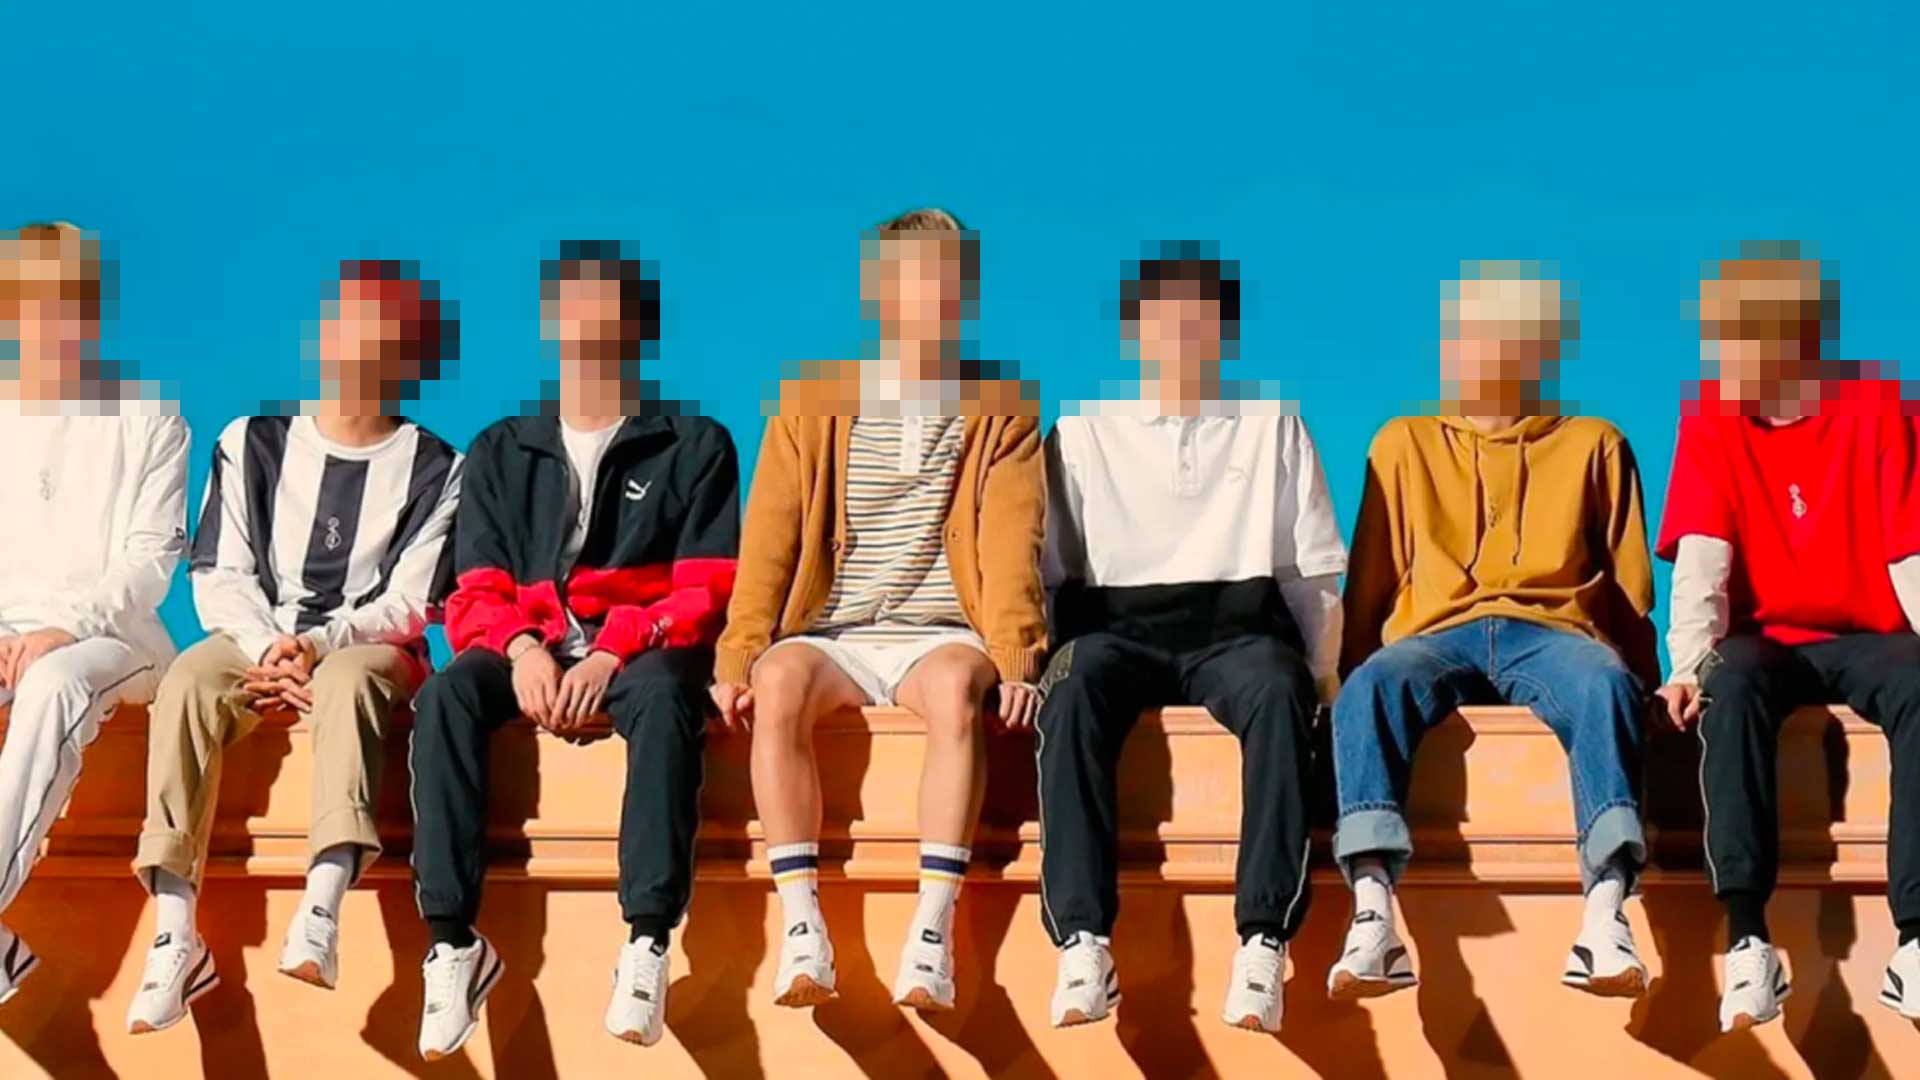 A blurred image of a K-pop group